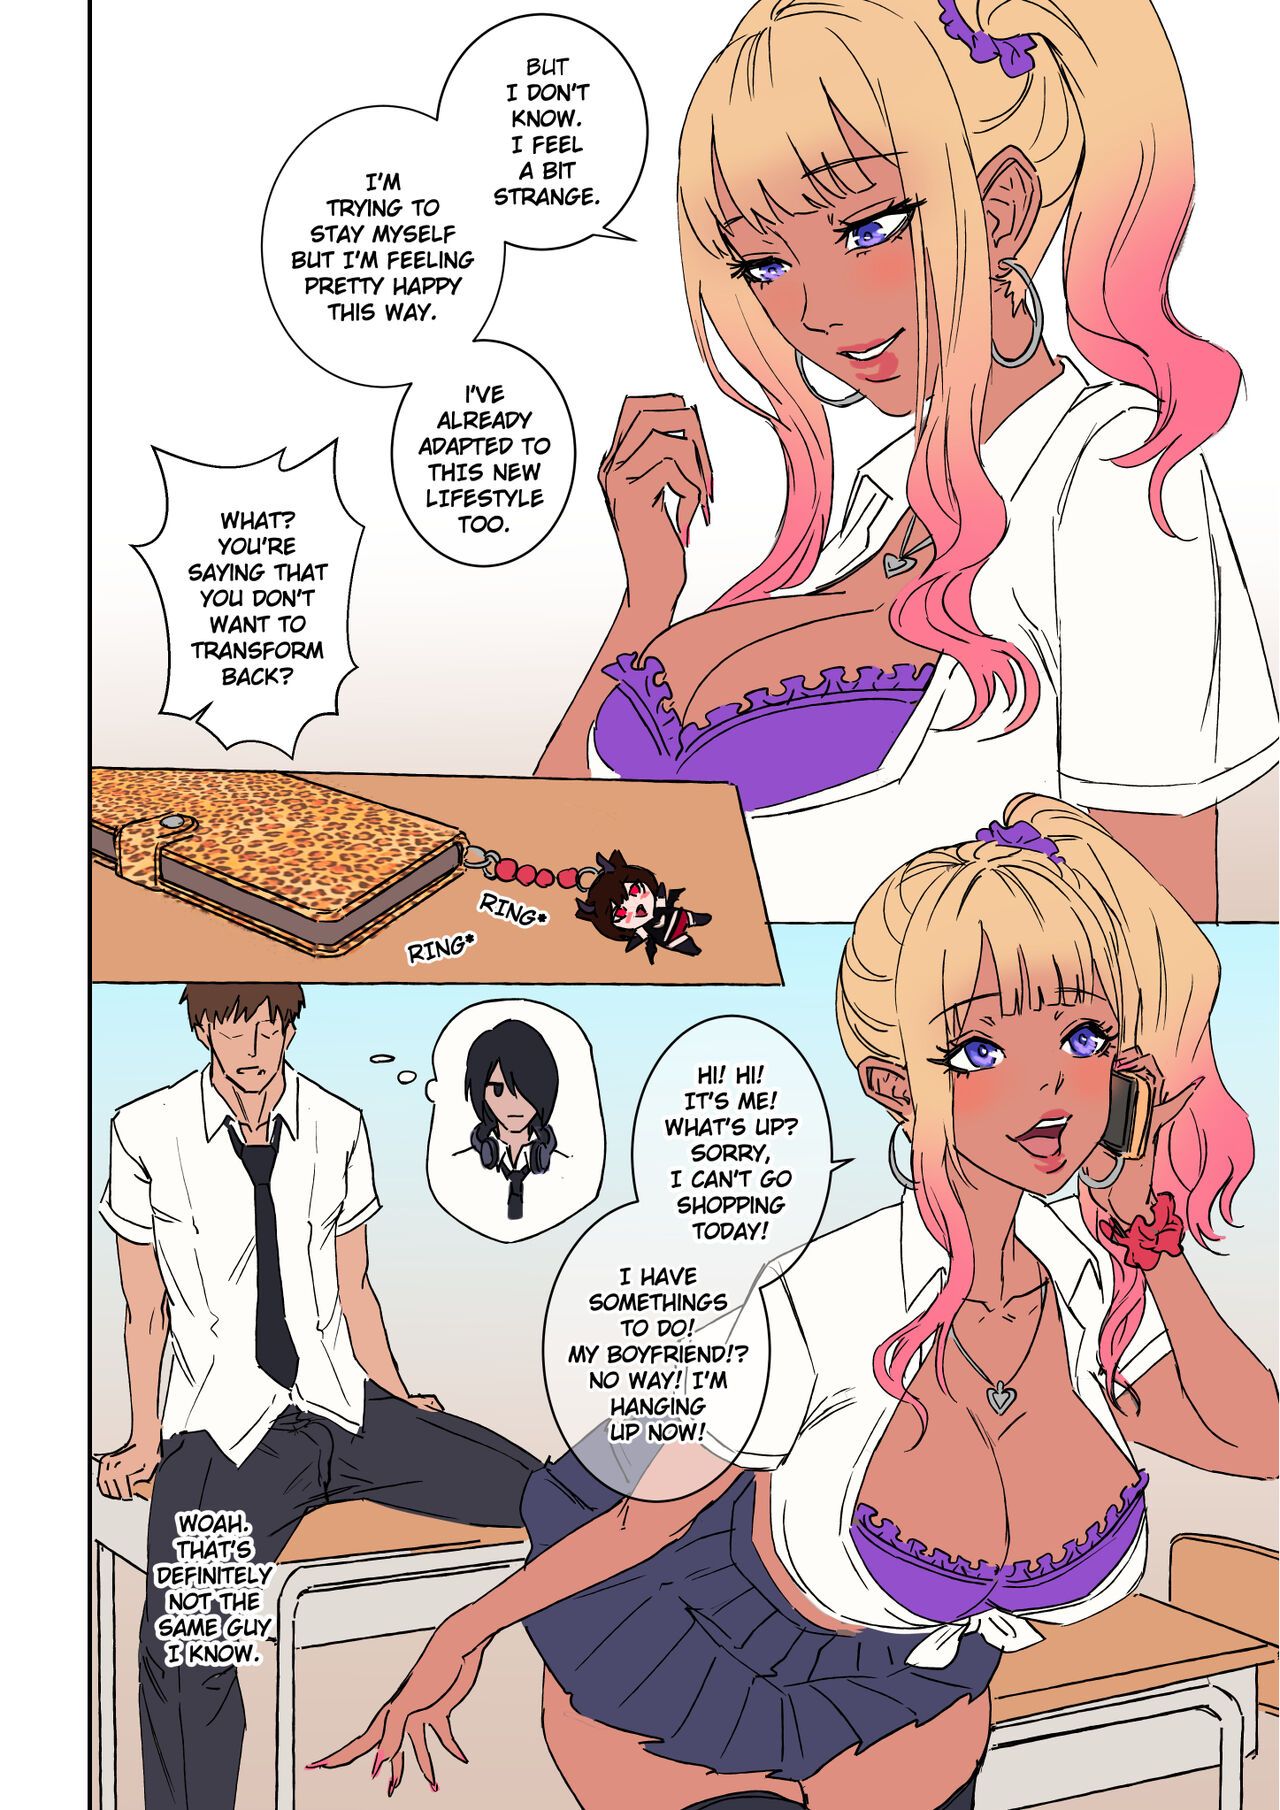 Transformed Into A Woman - My Shy Best Friend Turned Into a Gal Girl Porn Comic english 11 - Porn Comic